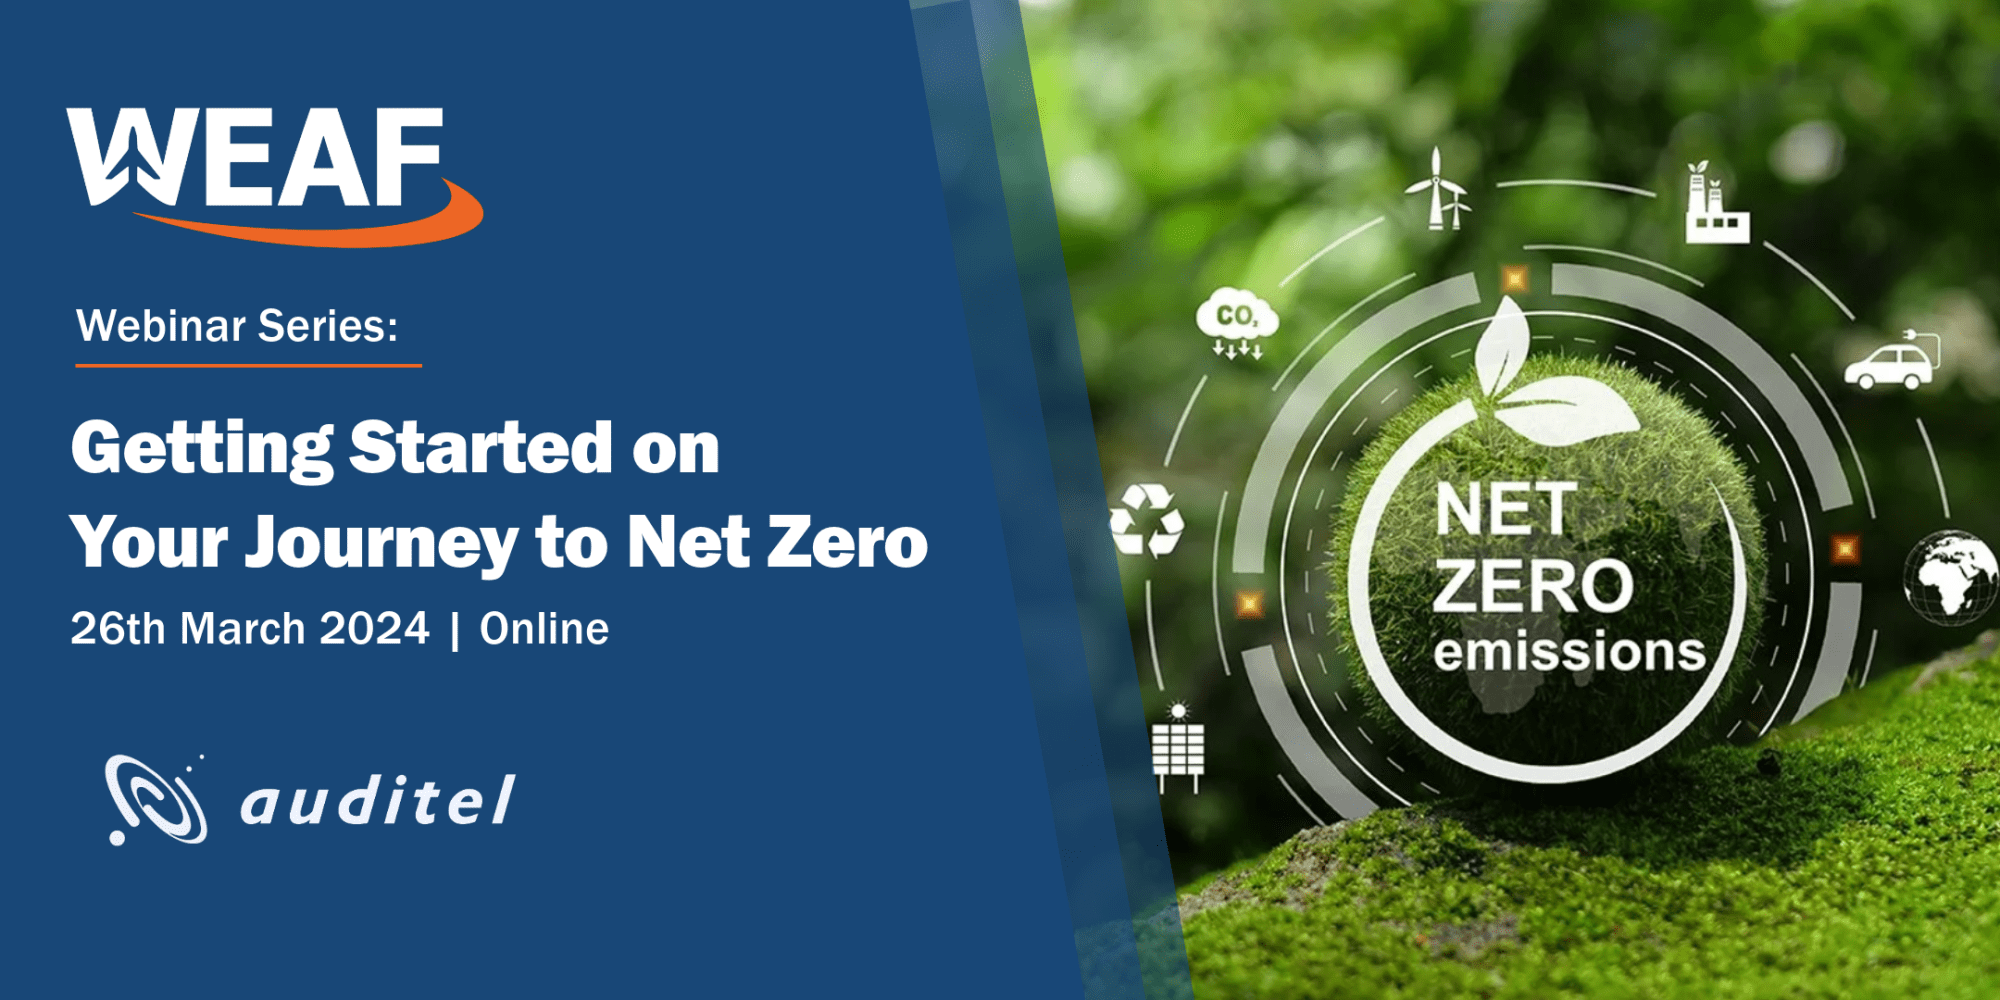 Webinar Series: Getting Started on Your Journey to Net Zero